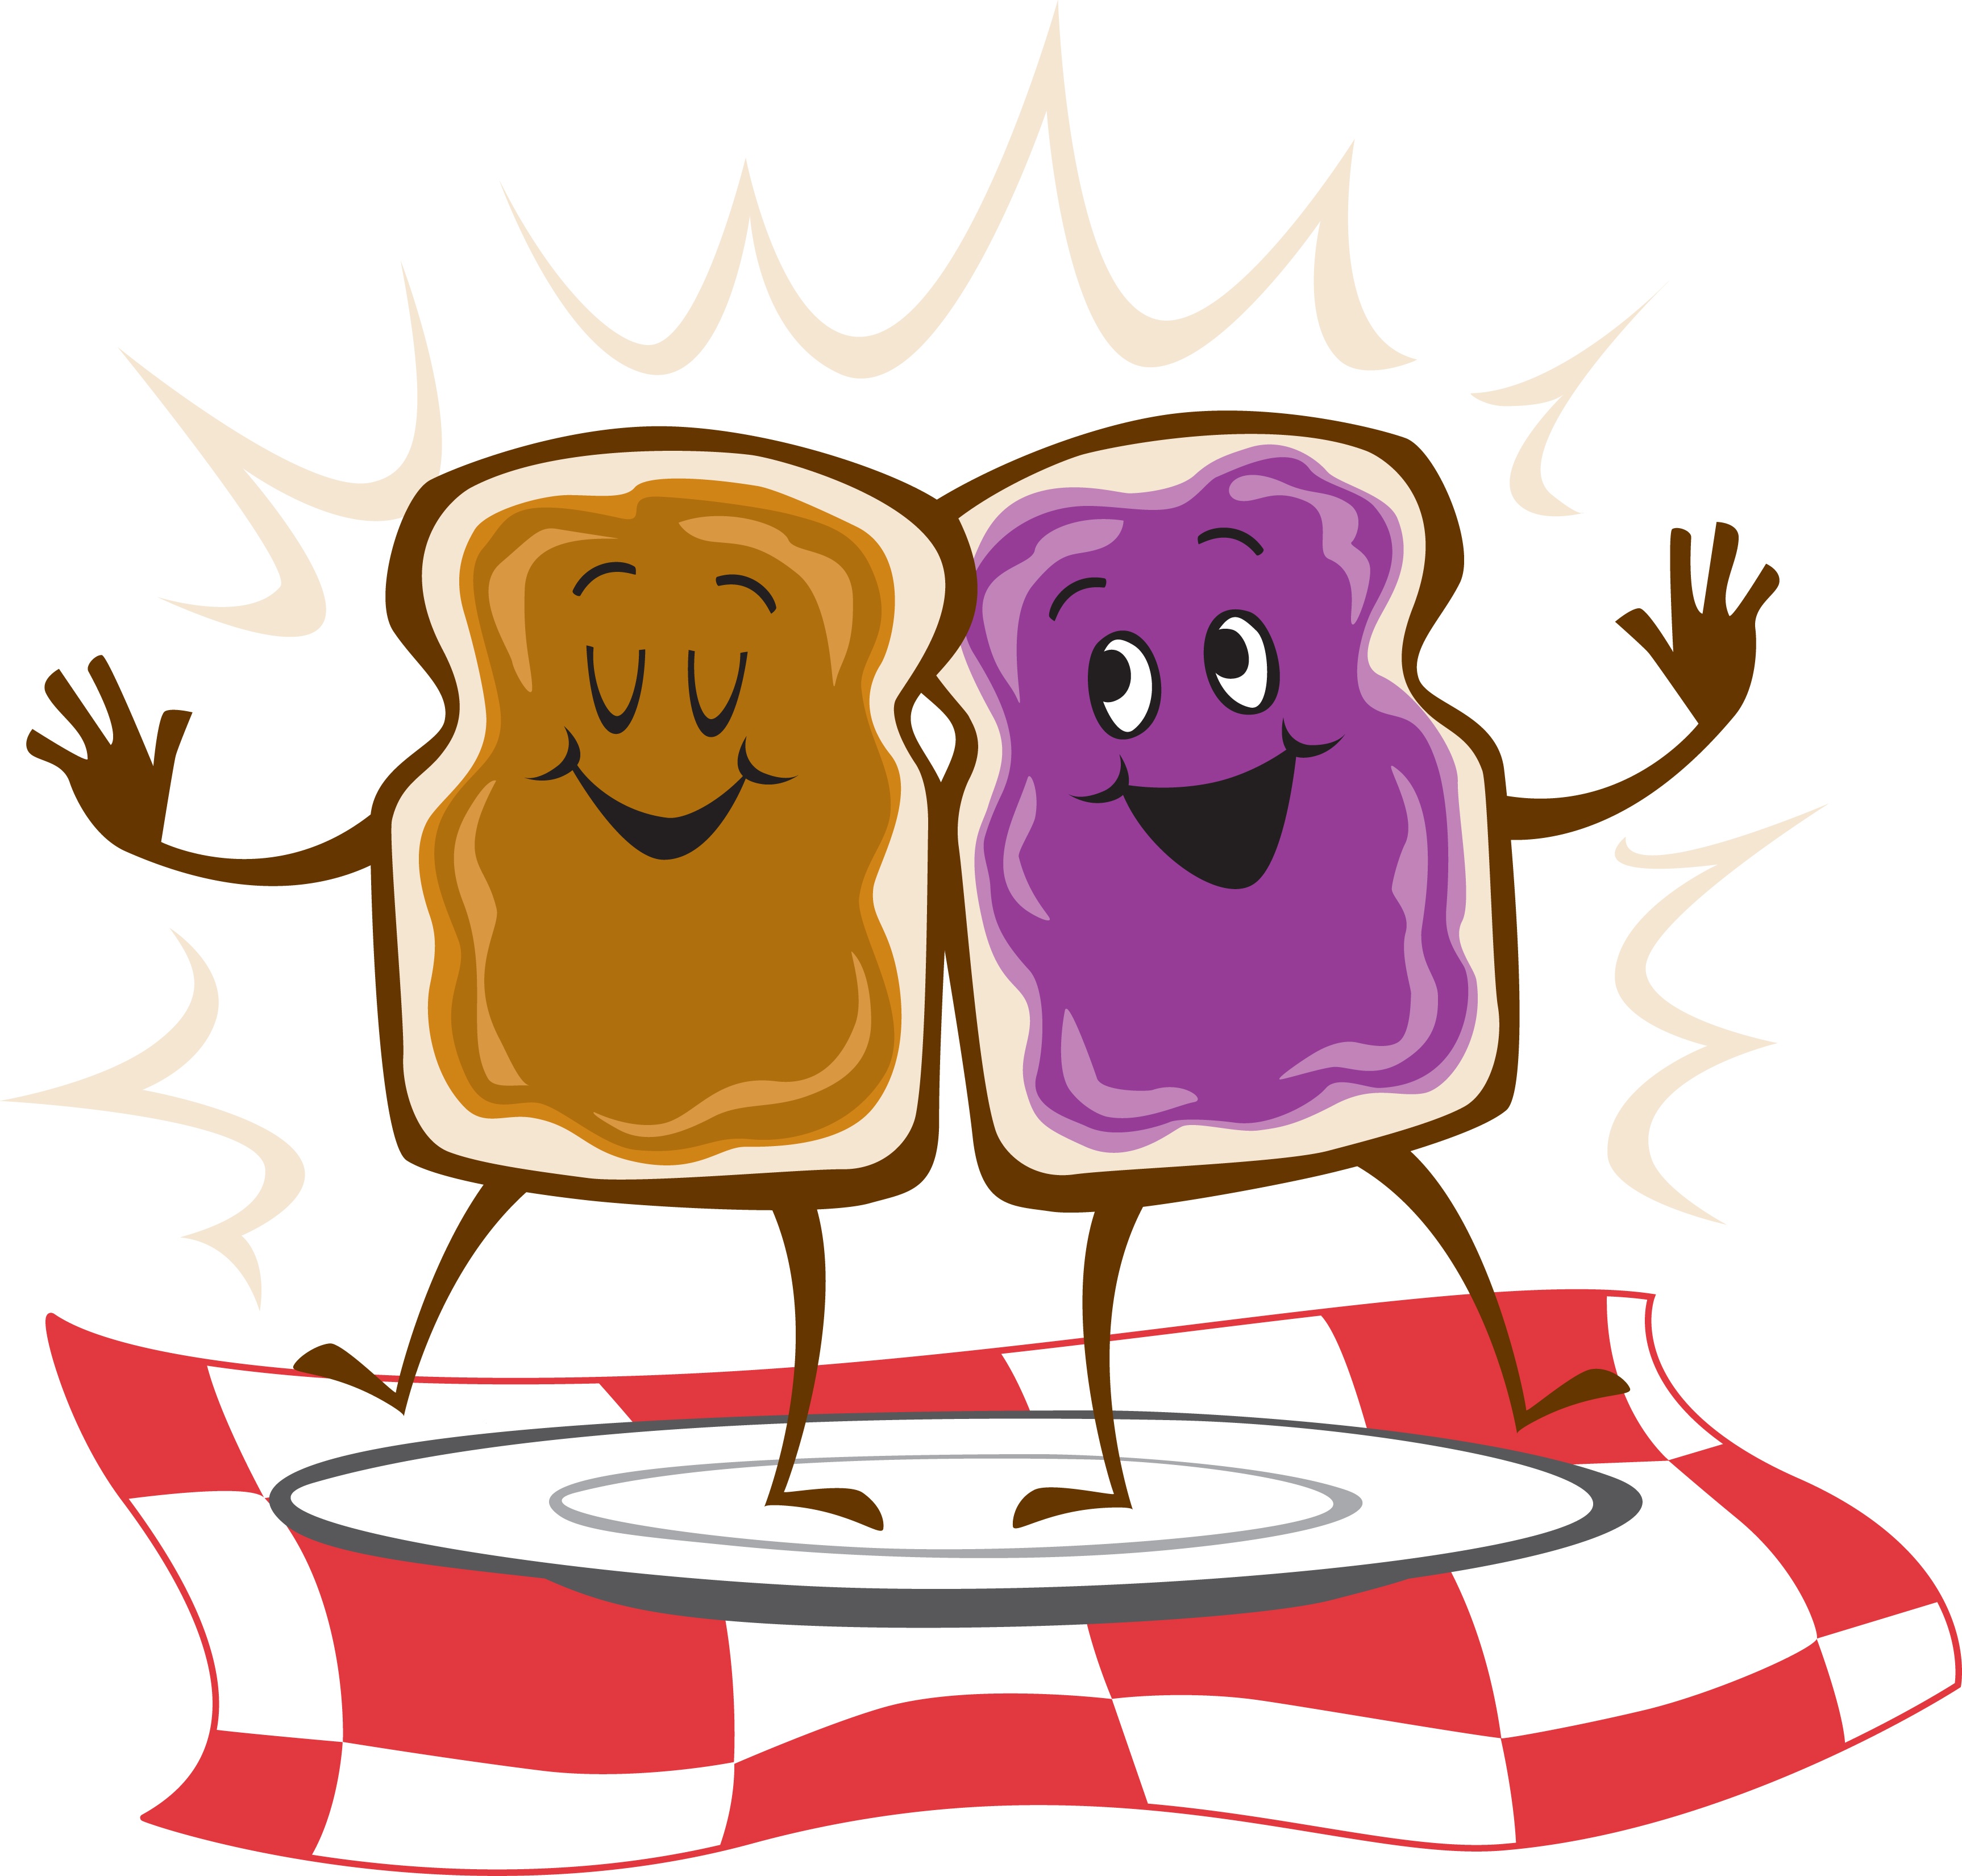 Marketing Peanut Butter Jelly Time clipart free image.